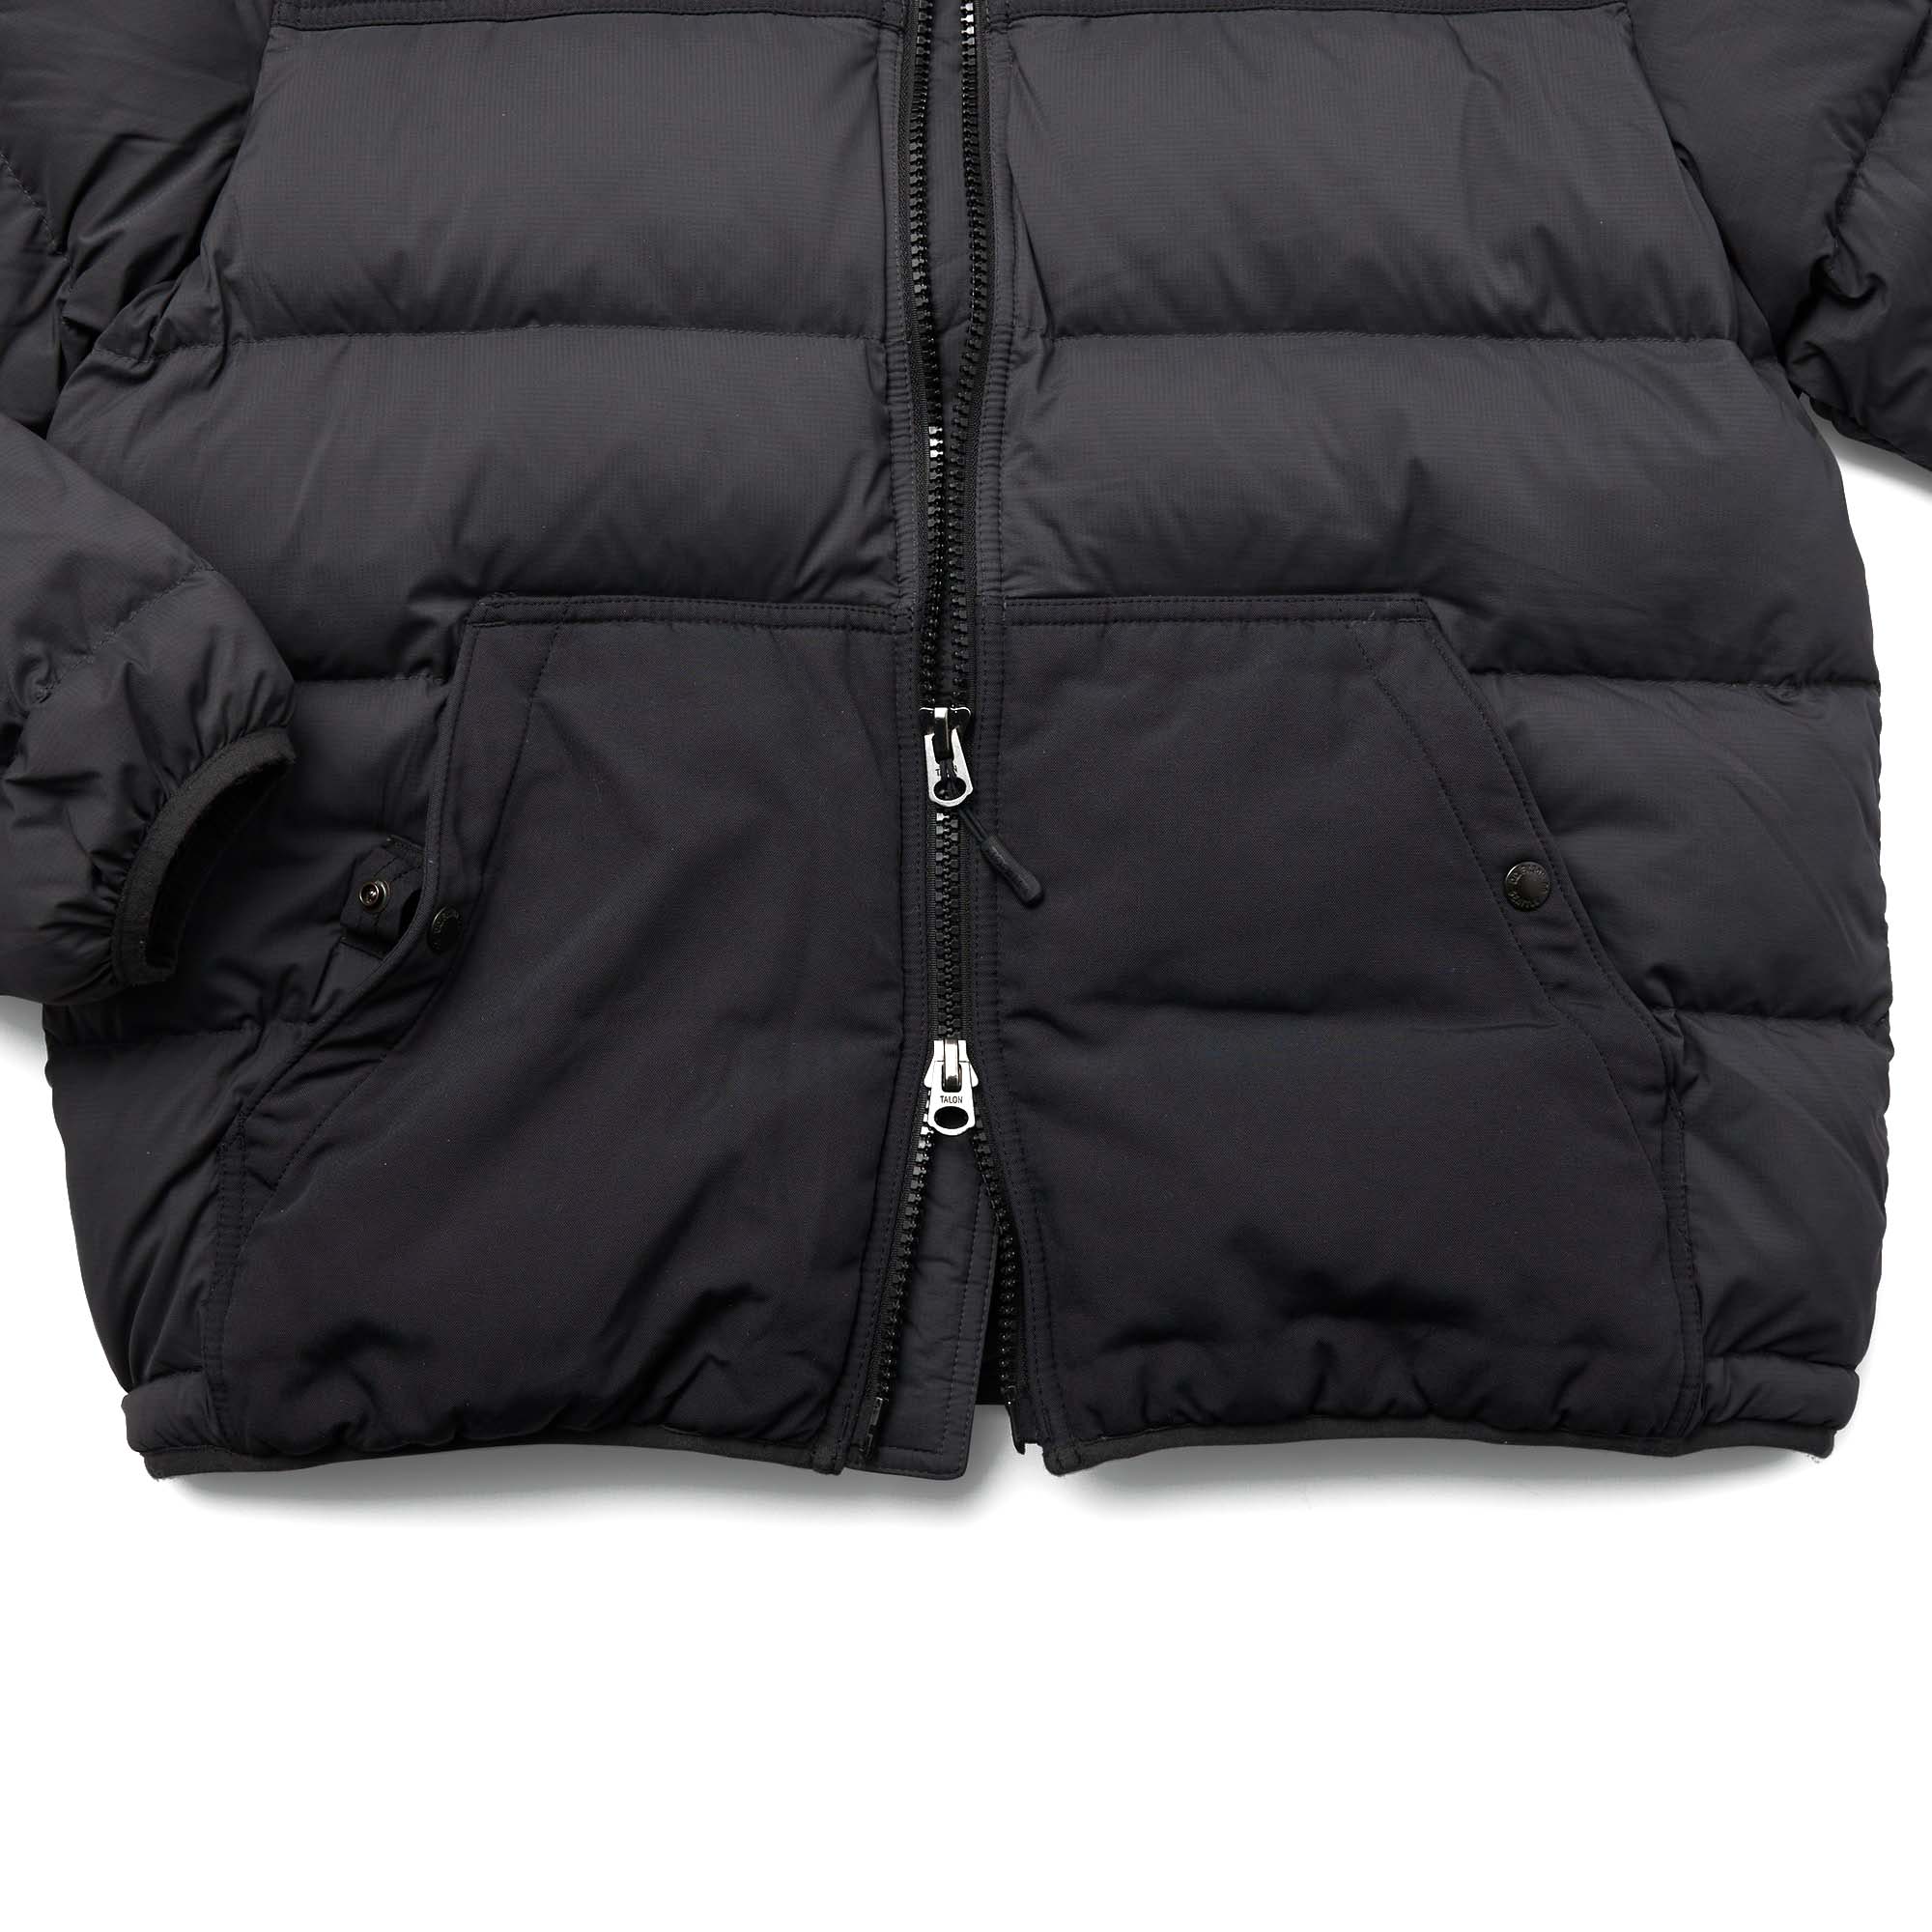 Filson Featherweight Down Jacket - Faded Black